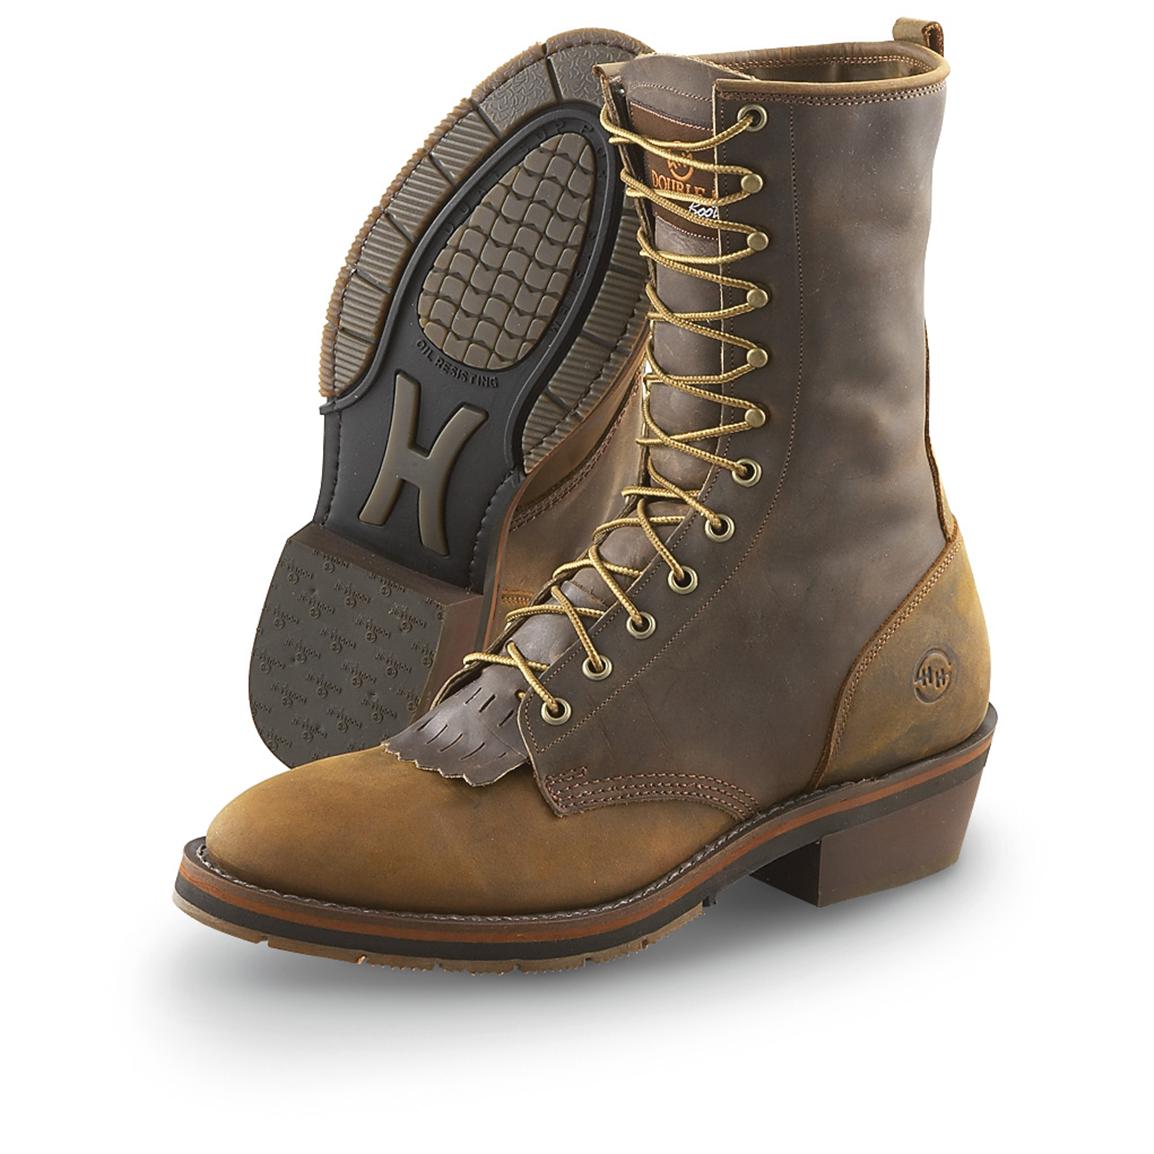 double h packer boots